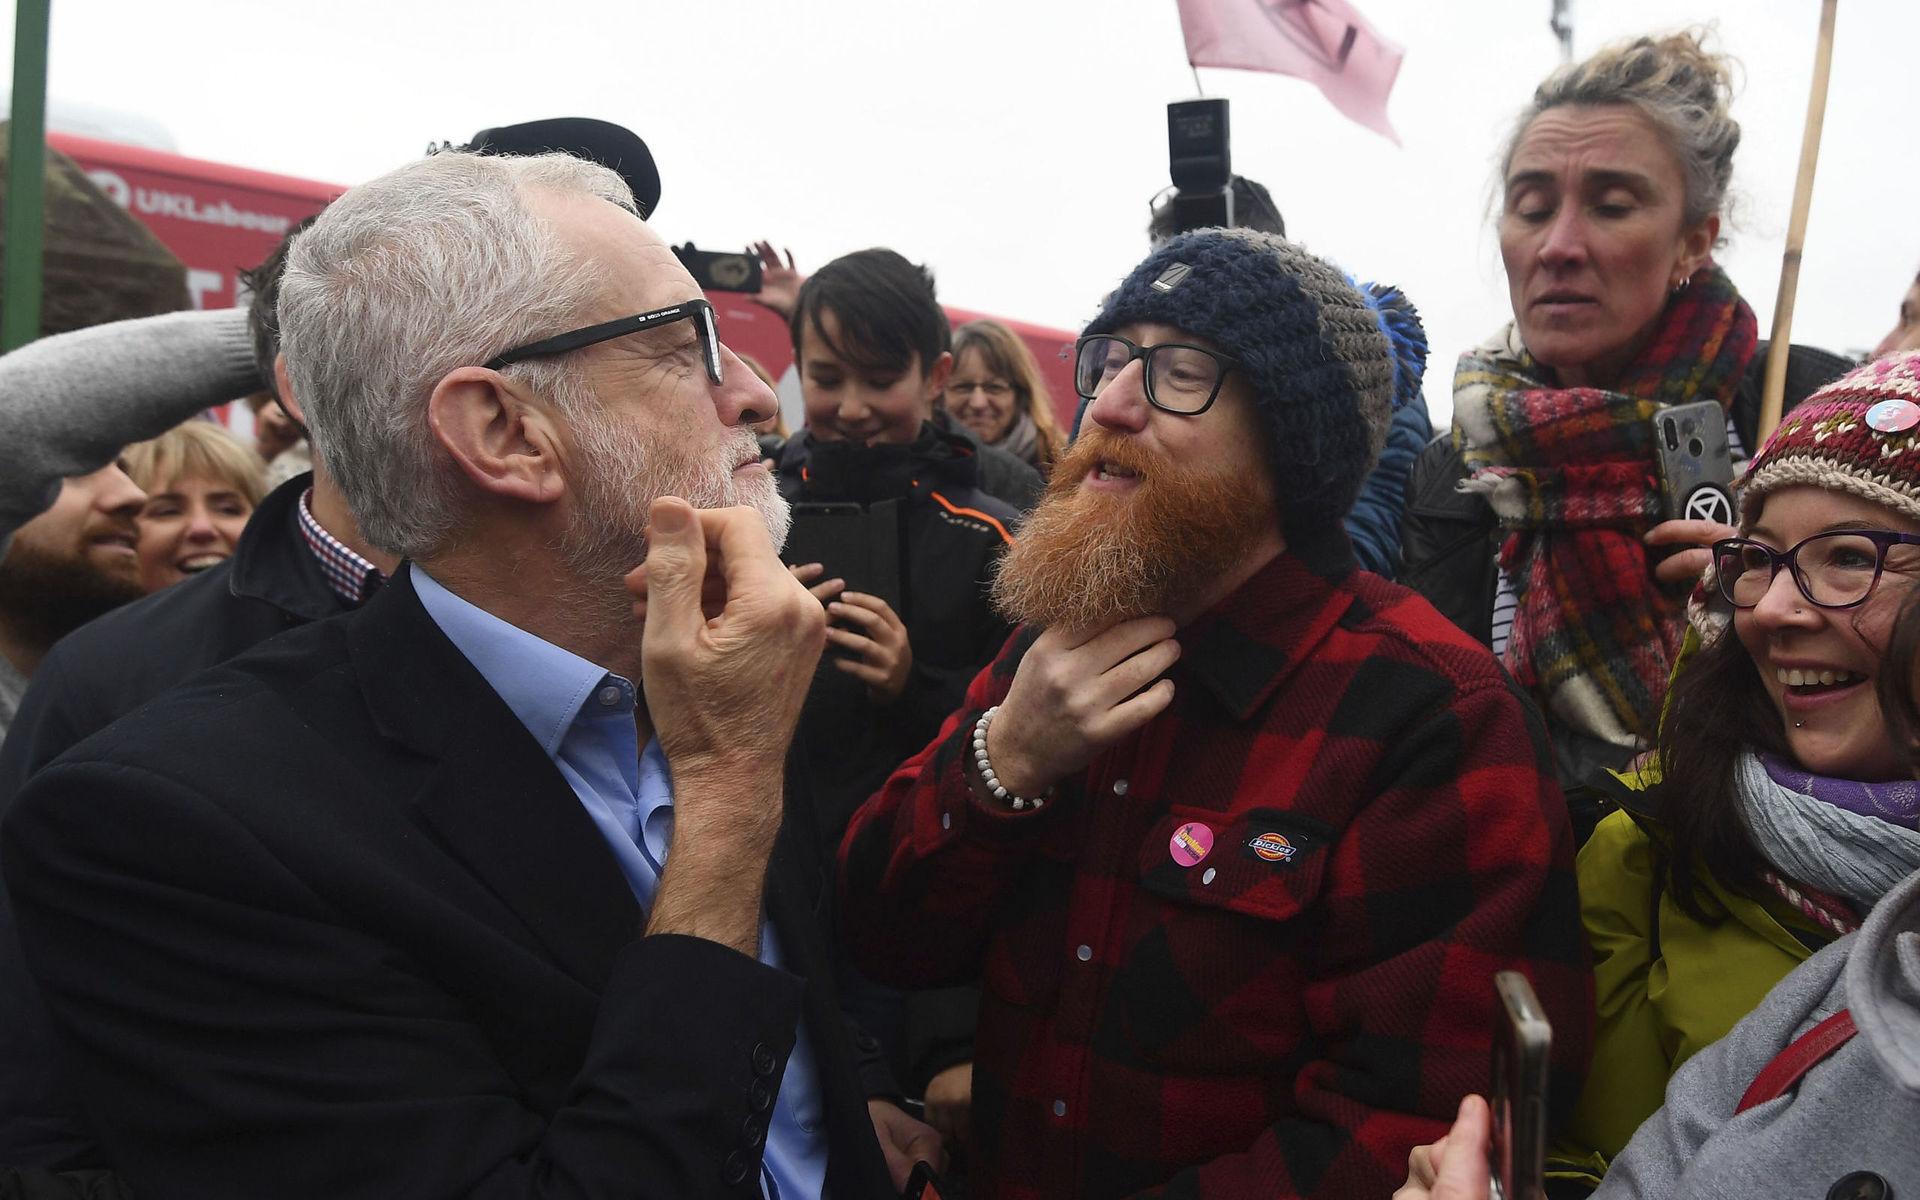 Labour Party leader Jeremy Corbyn compares beards with a supporter during a visit to Swansea, while on the General Election campaign trail in Wales, Saturday, Dec. 7, 2019. Britain goes to the polls on Thursday, Dec. 12. (Victoria Jones/PA via AP)  LLT806